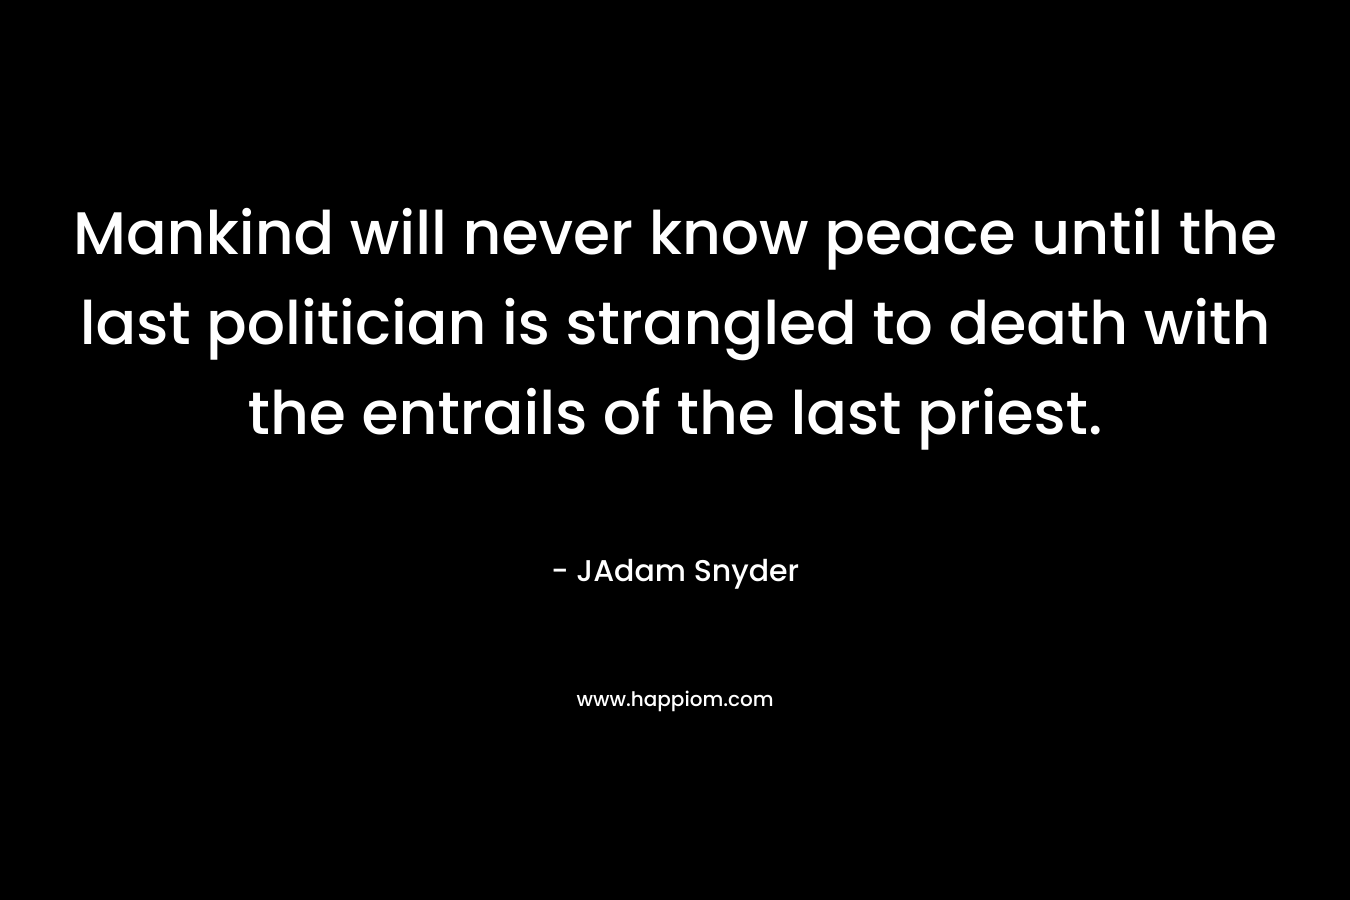 Mankind will never know peace until the last politician is strangled to death with the entrails of the last priest. – JAdam Snyder